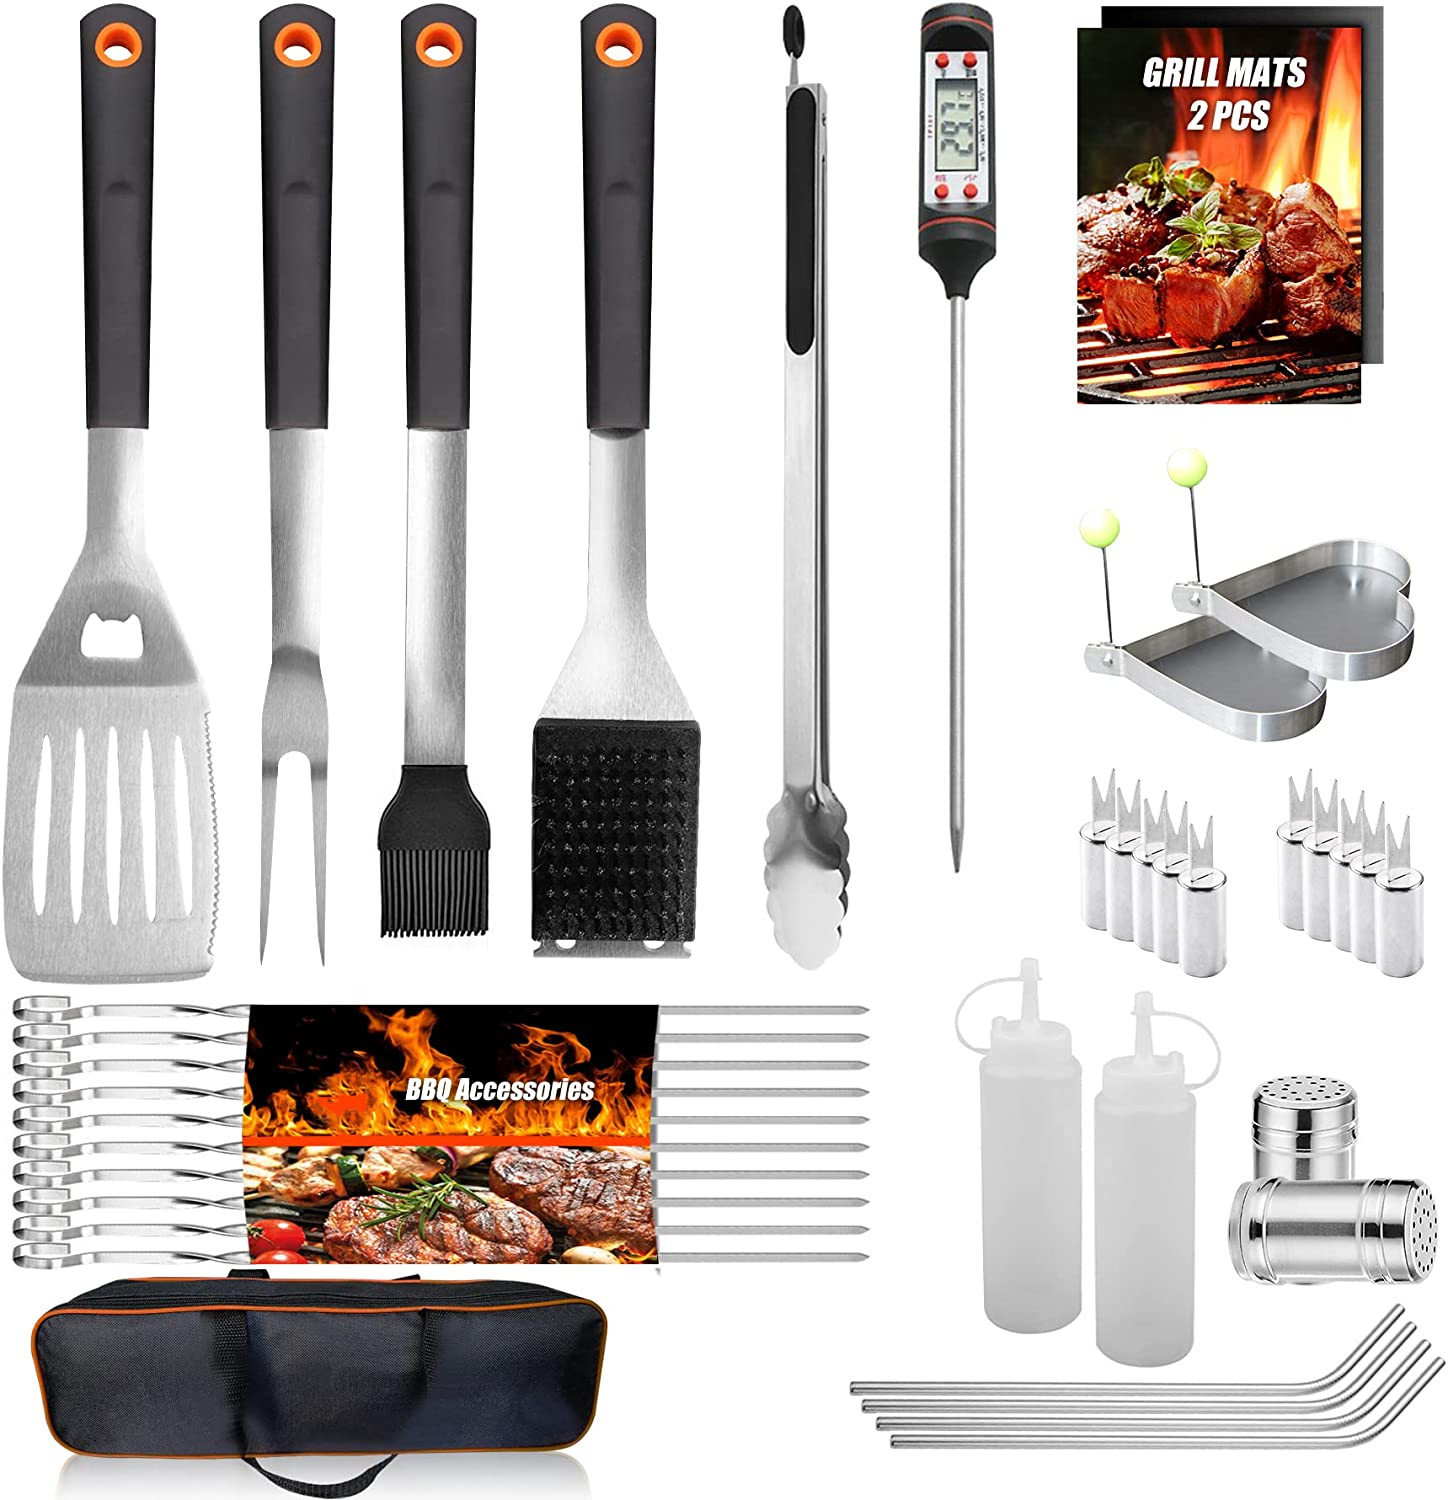 Grilling Tools & Accessories at